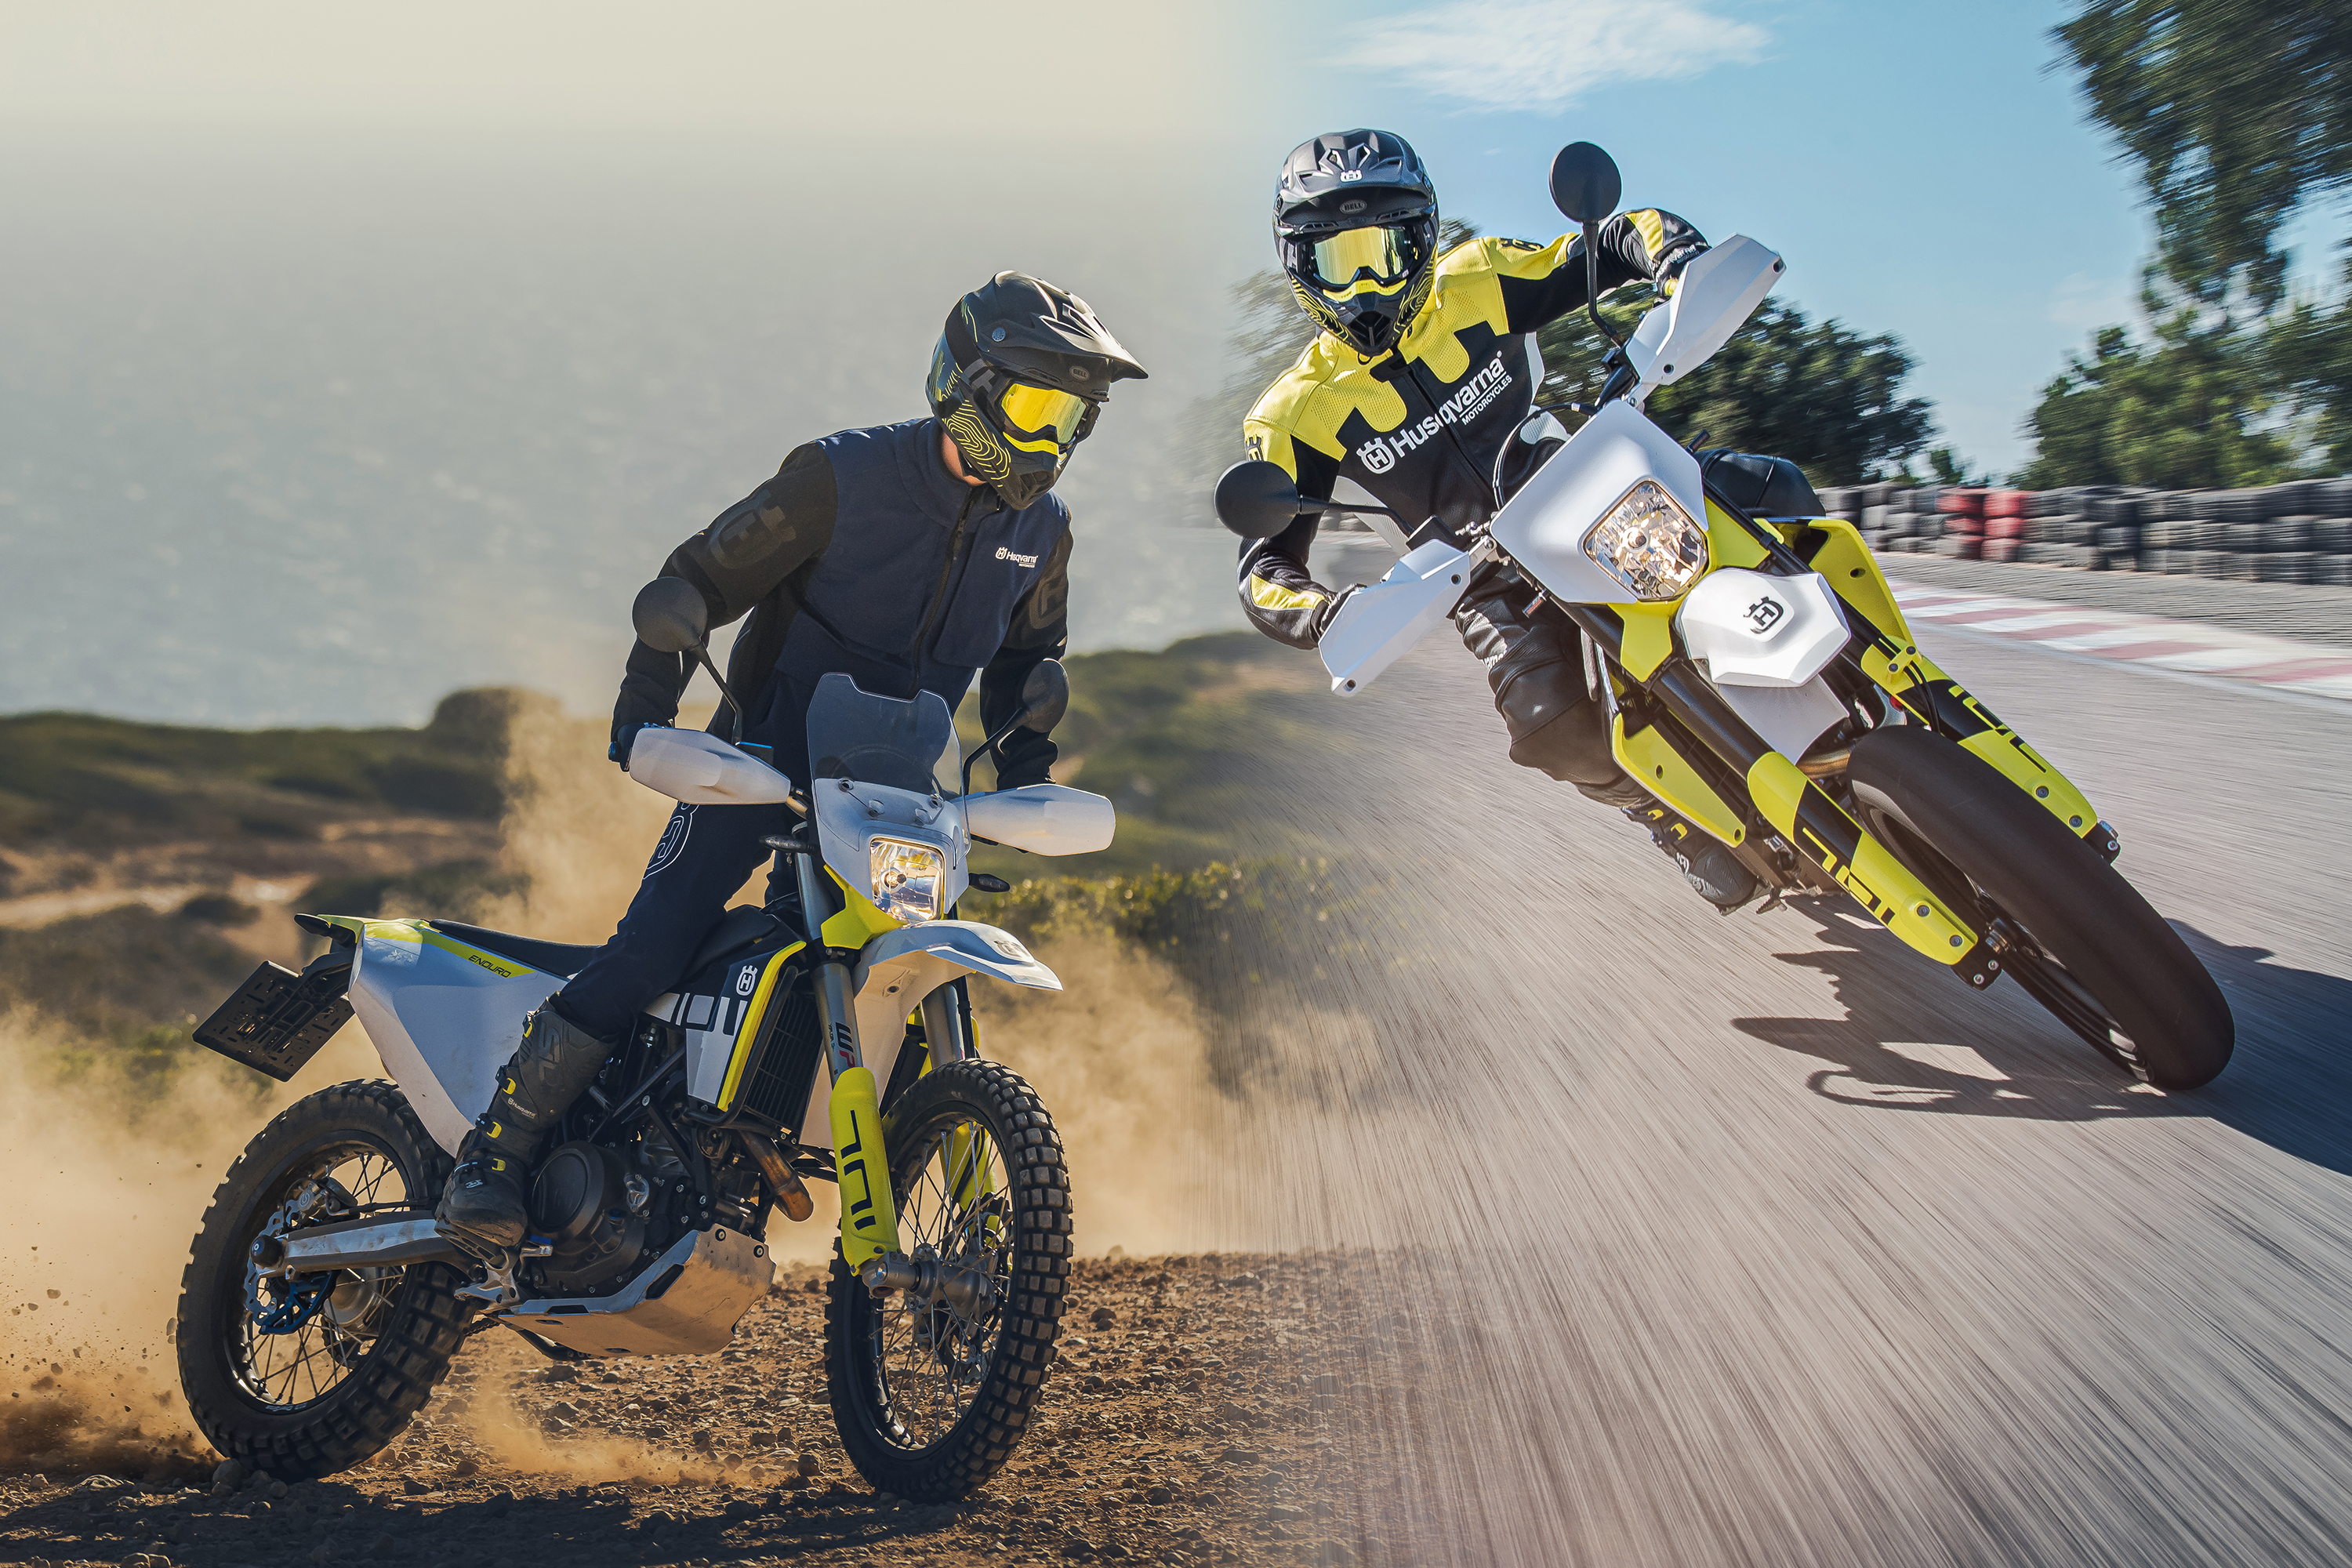 701 Enduro and 701 Supermoto models available now